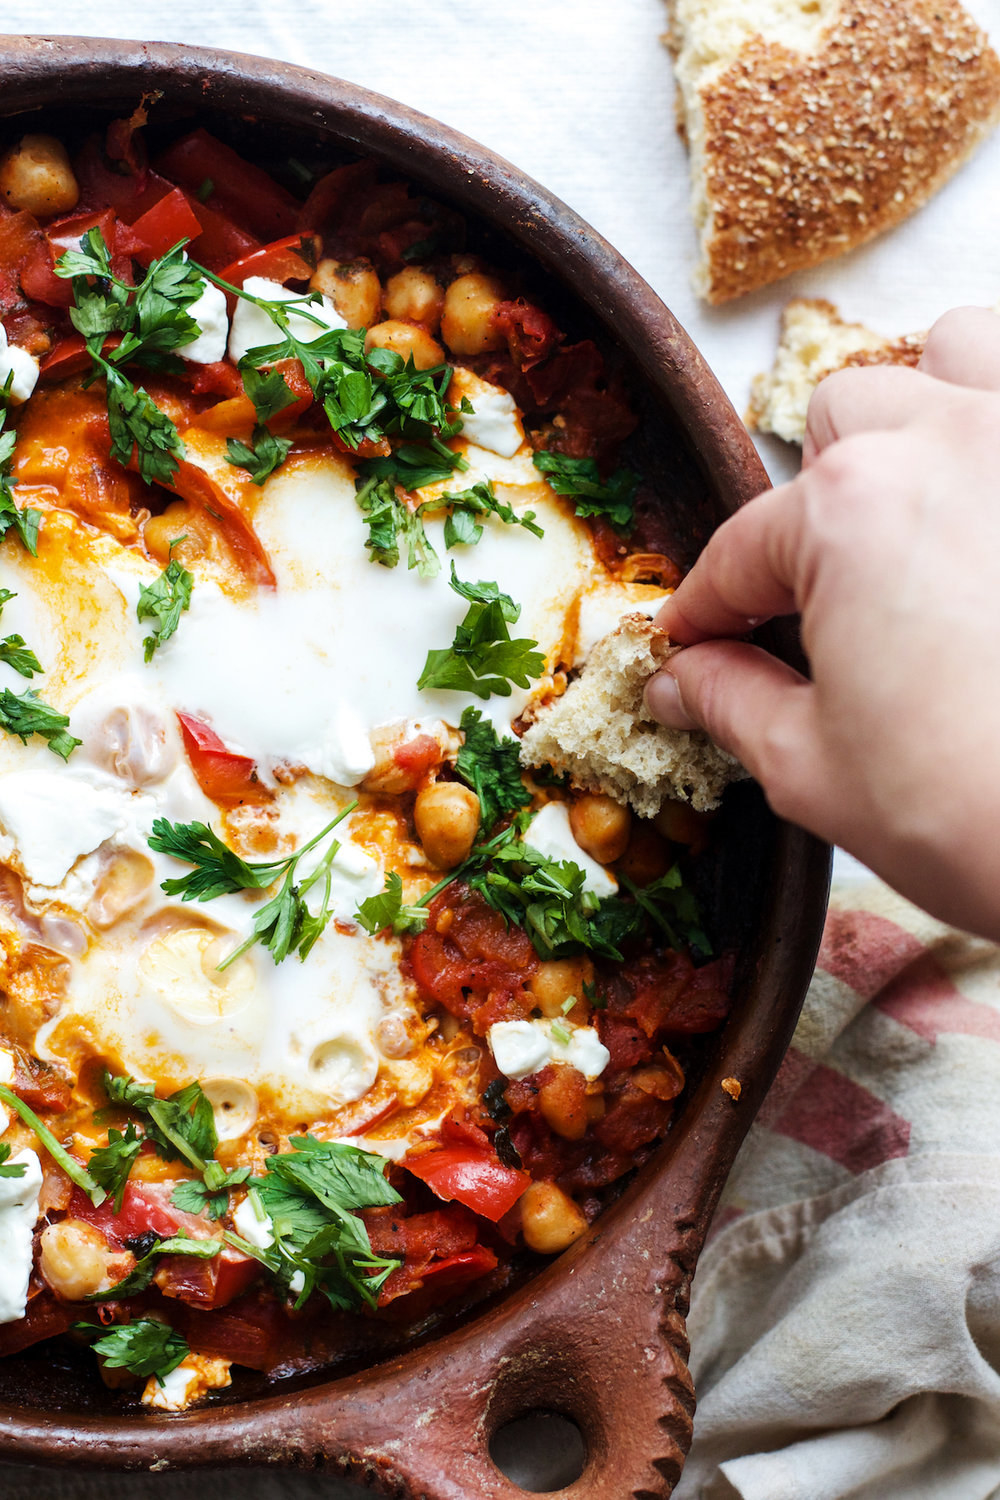 Someone dunking bread into a skillet of shakshuka with chickpeas, goat cheese, and herbs.